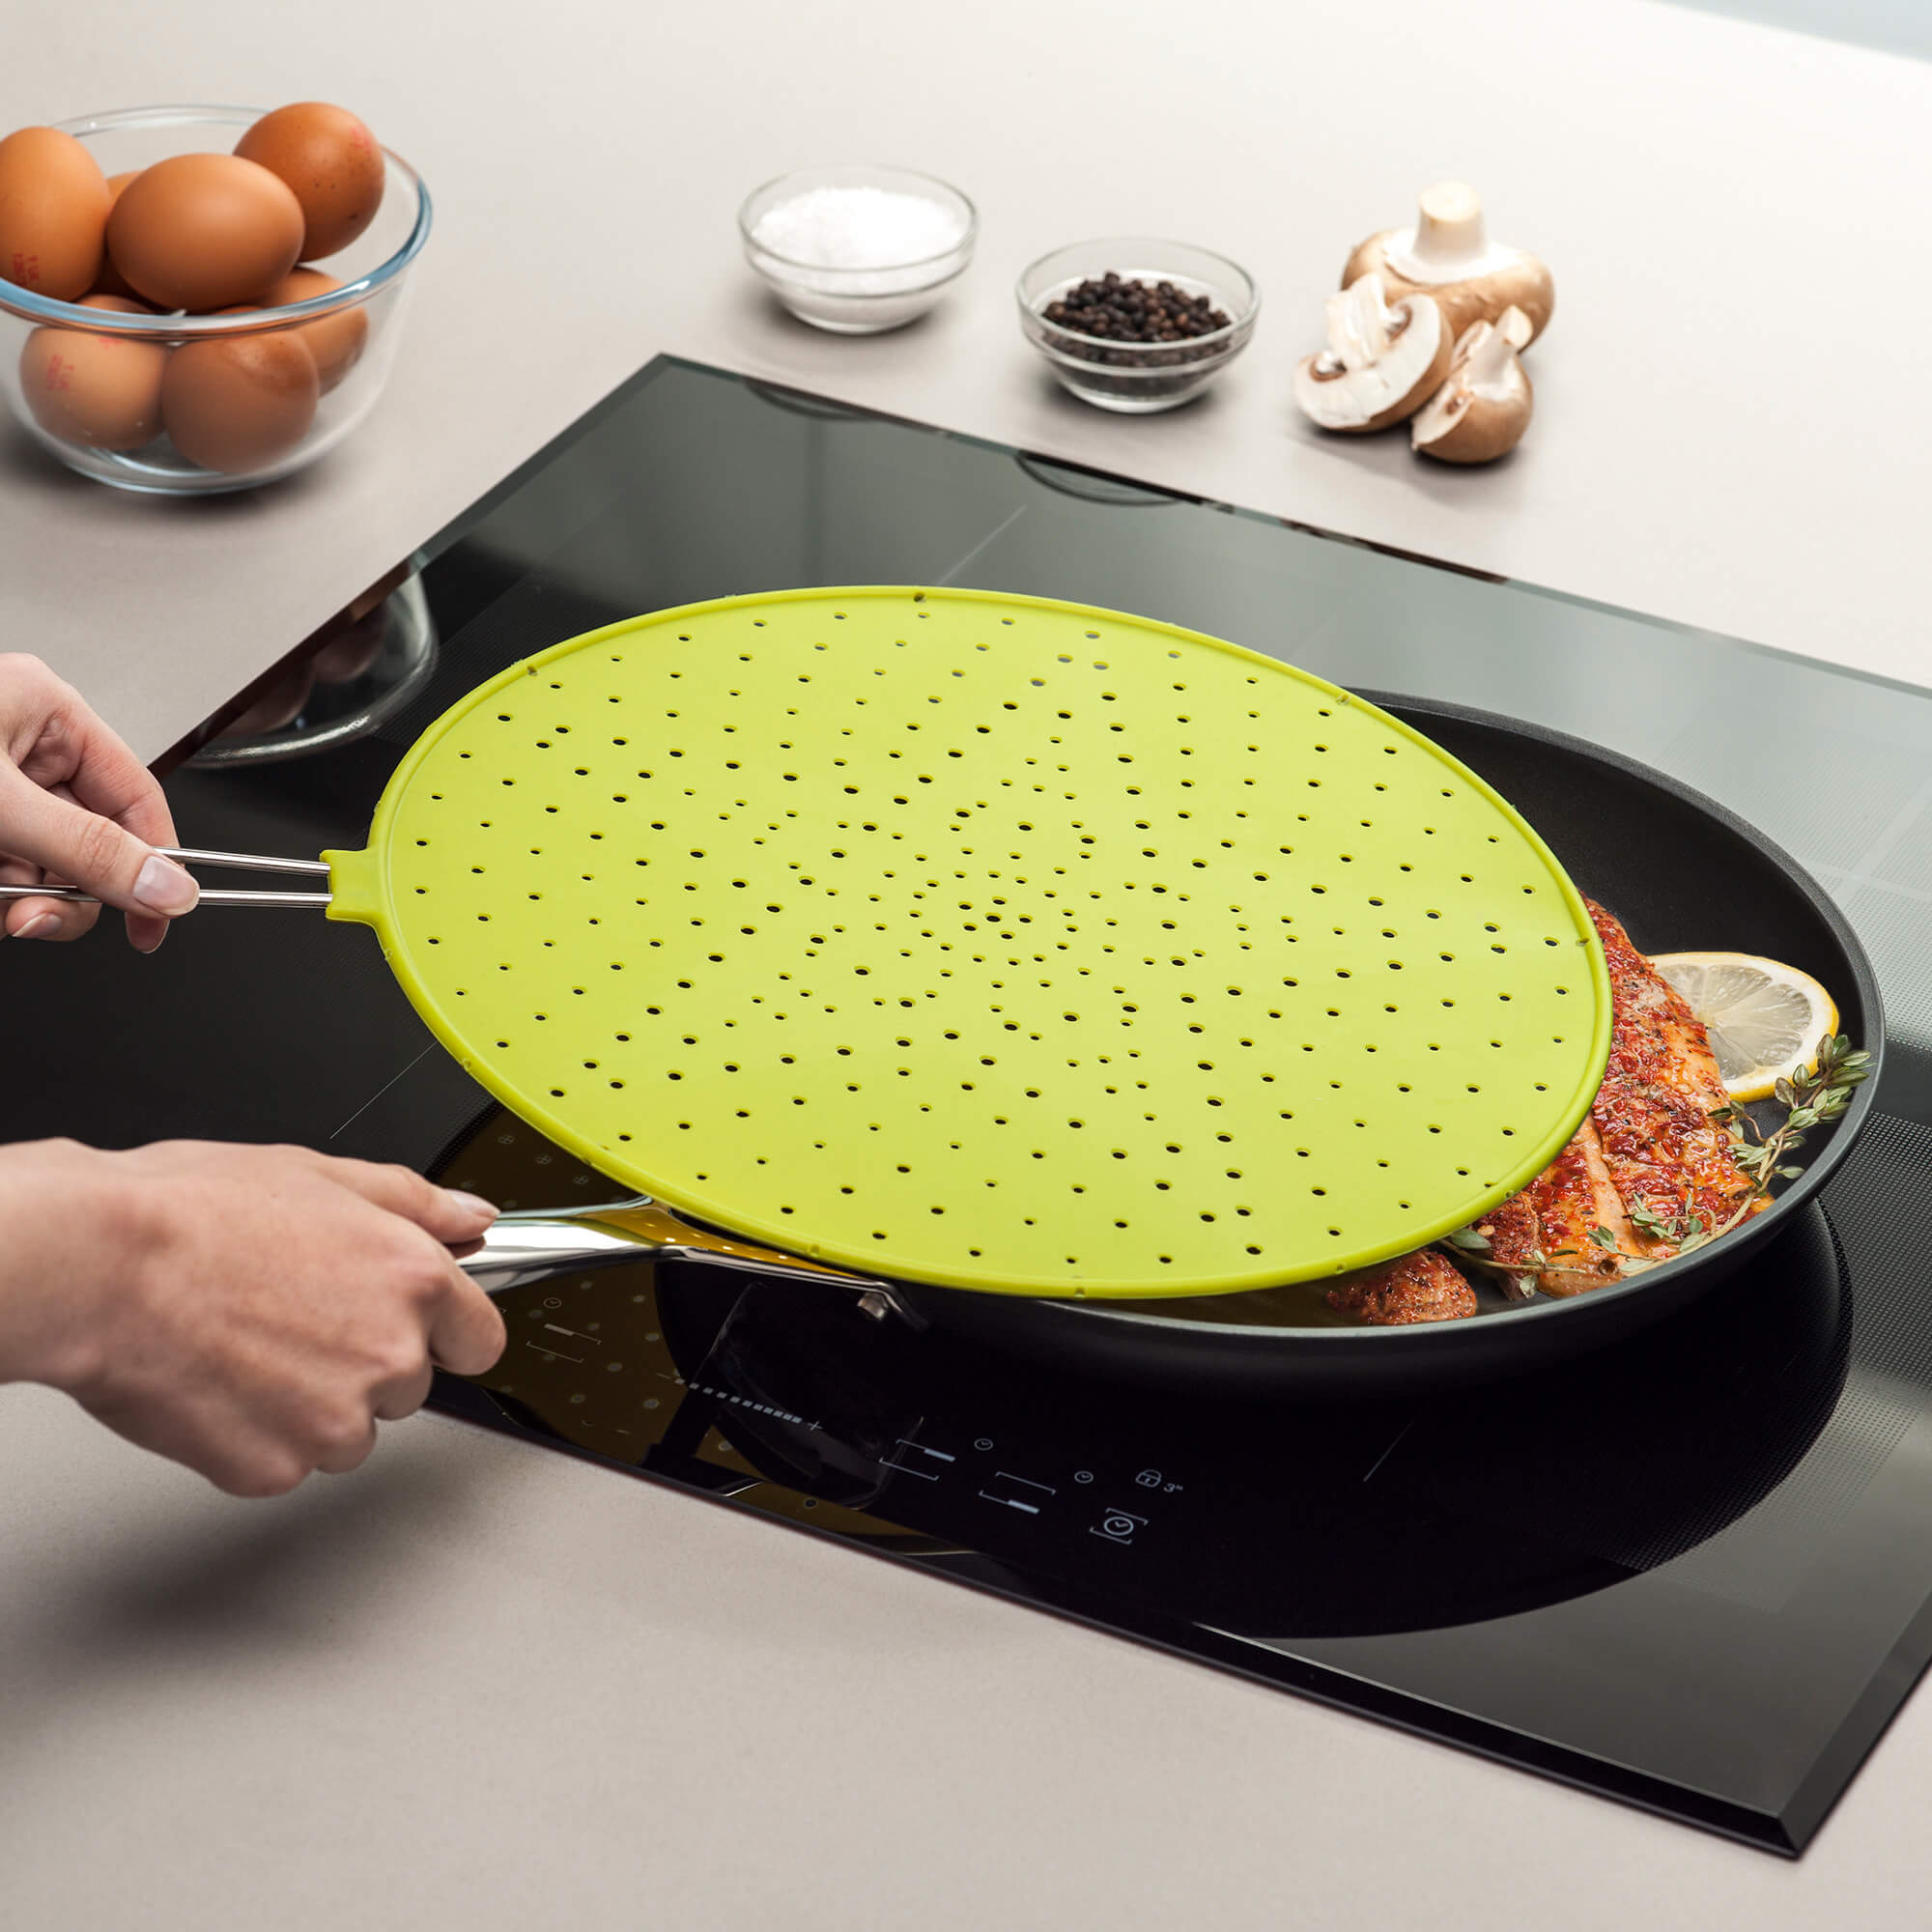 Zeal Lime No Splash Silicone Splatter Guard in use when cooking